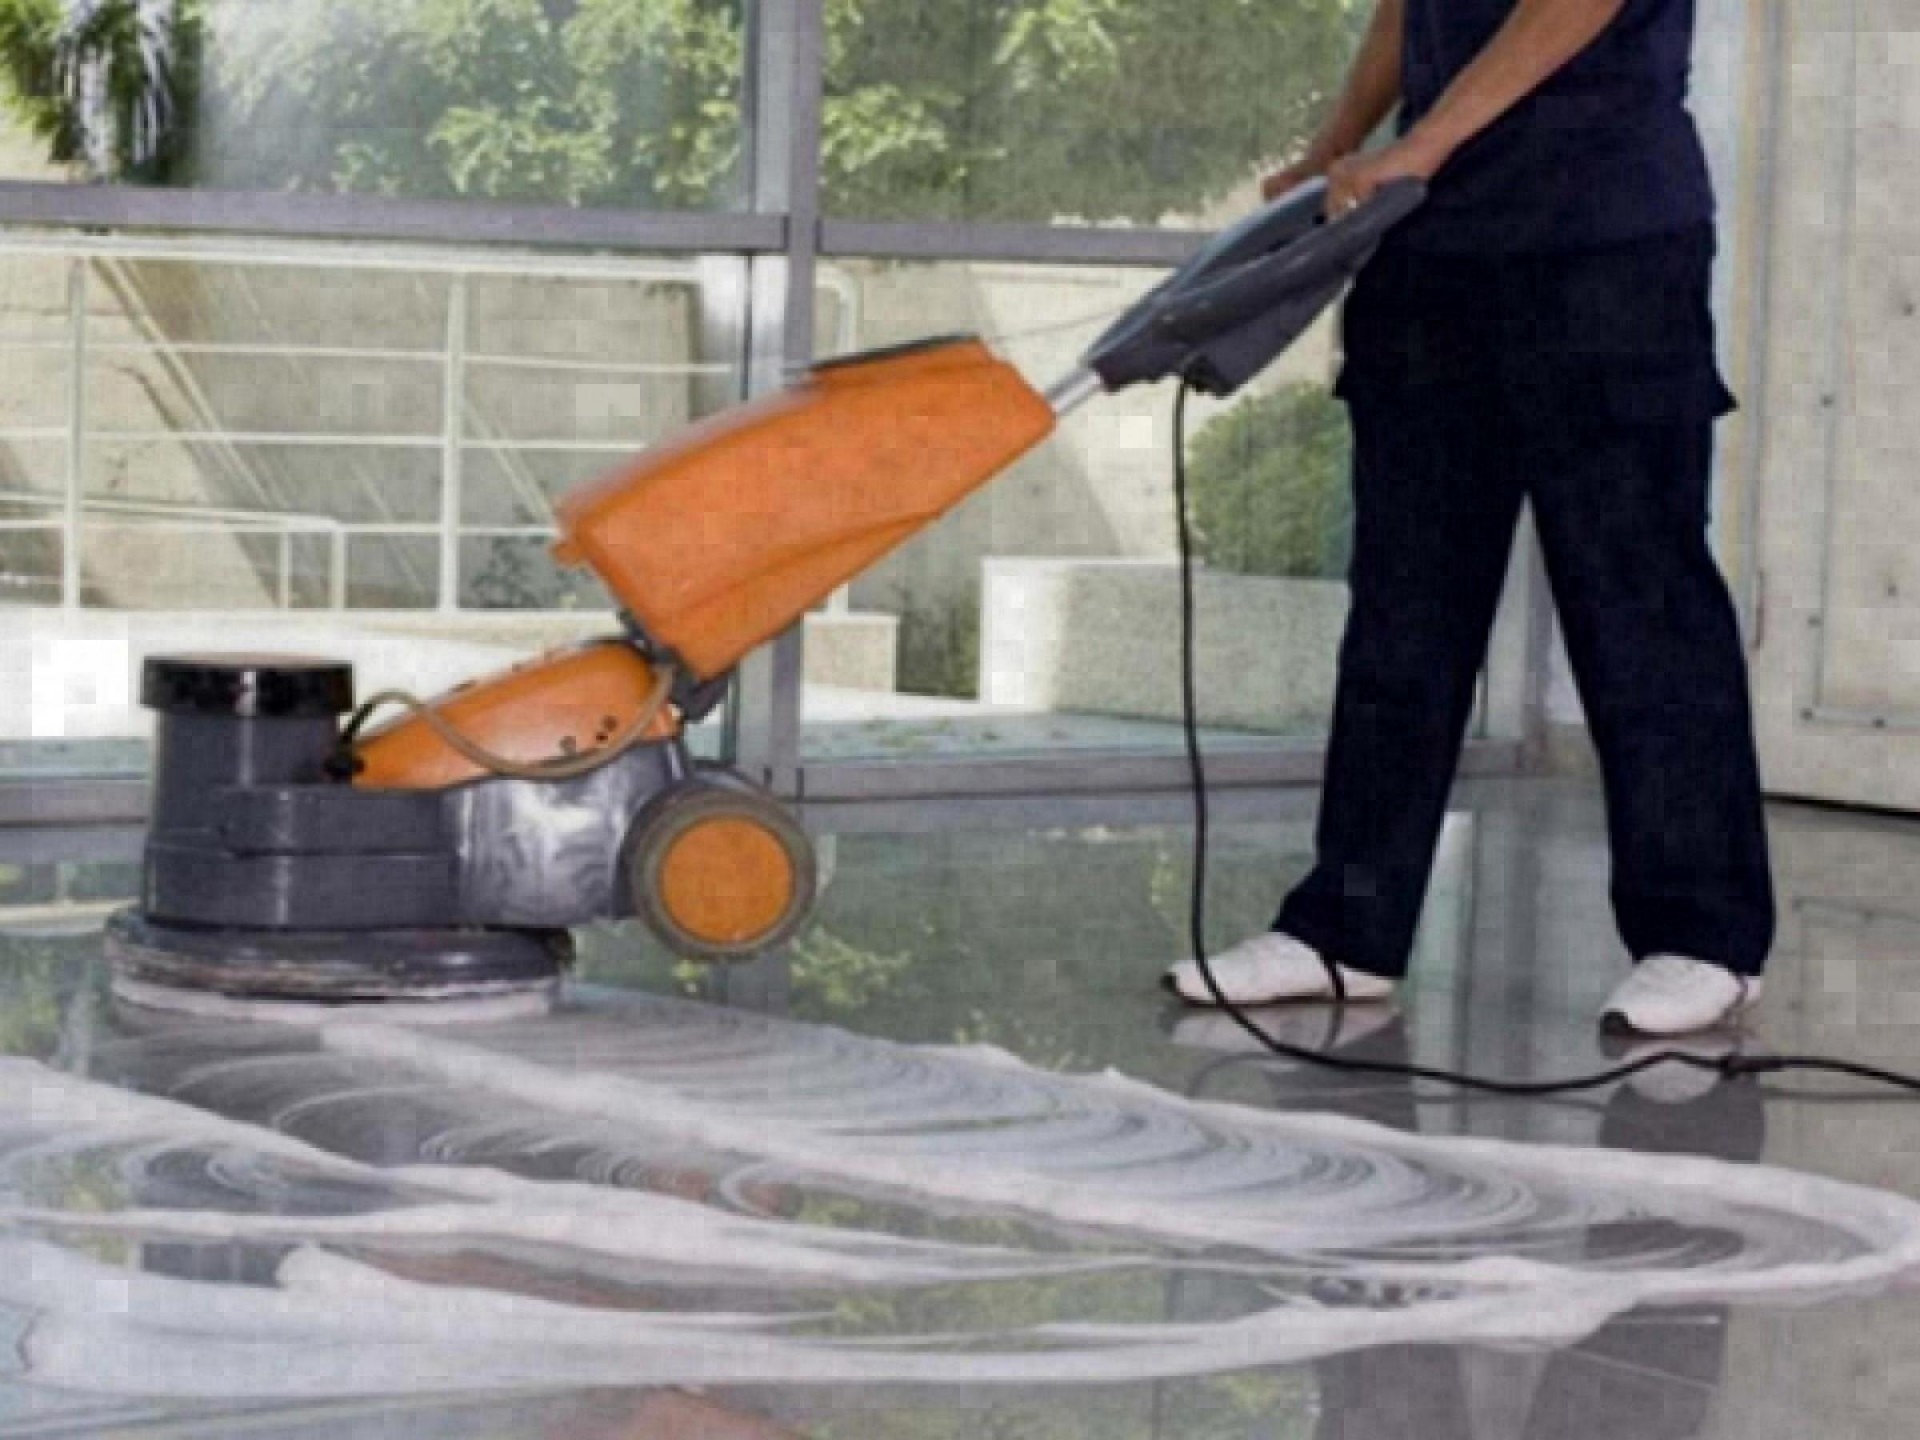 Commercial Cleaning Companies Wanted - EV...Business For Sale